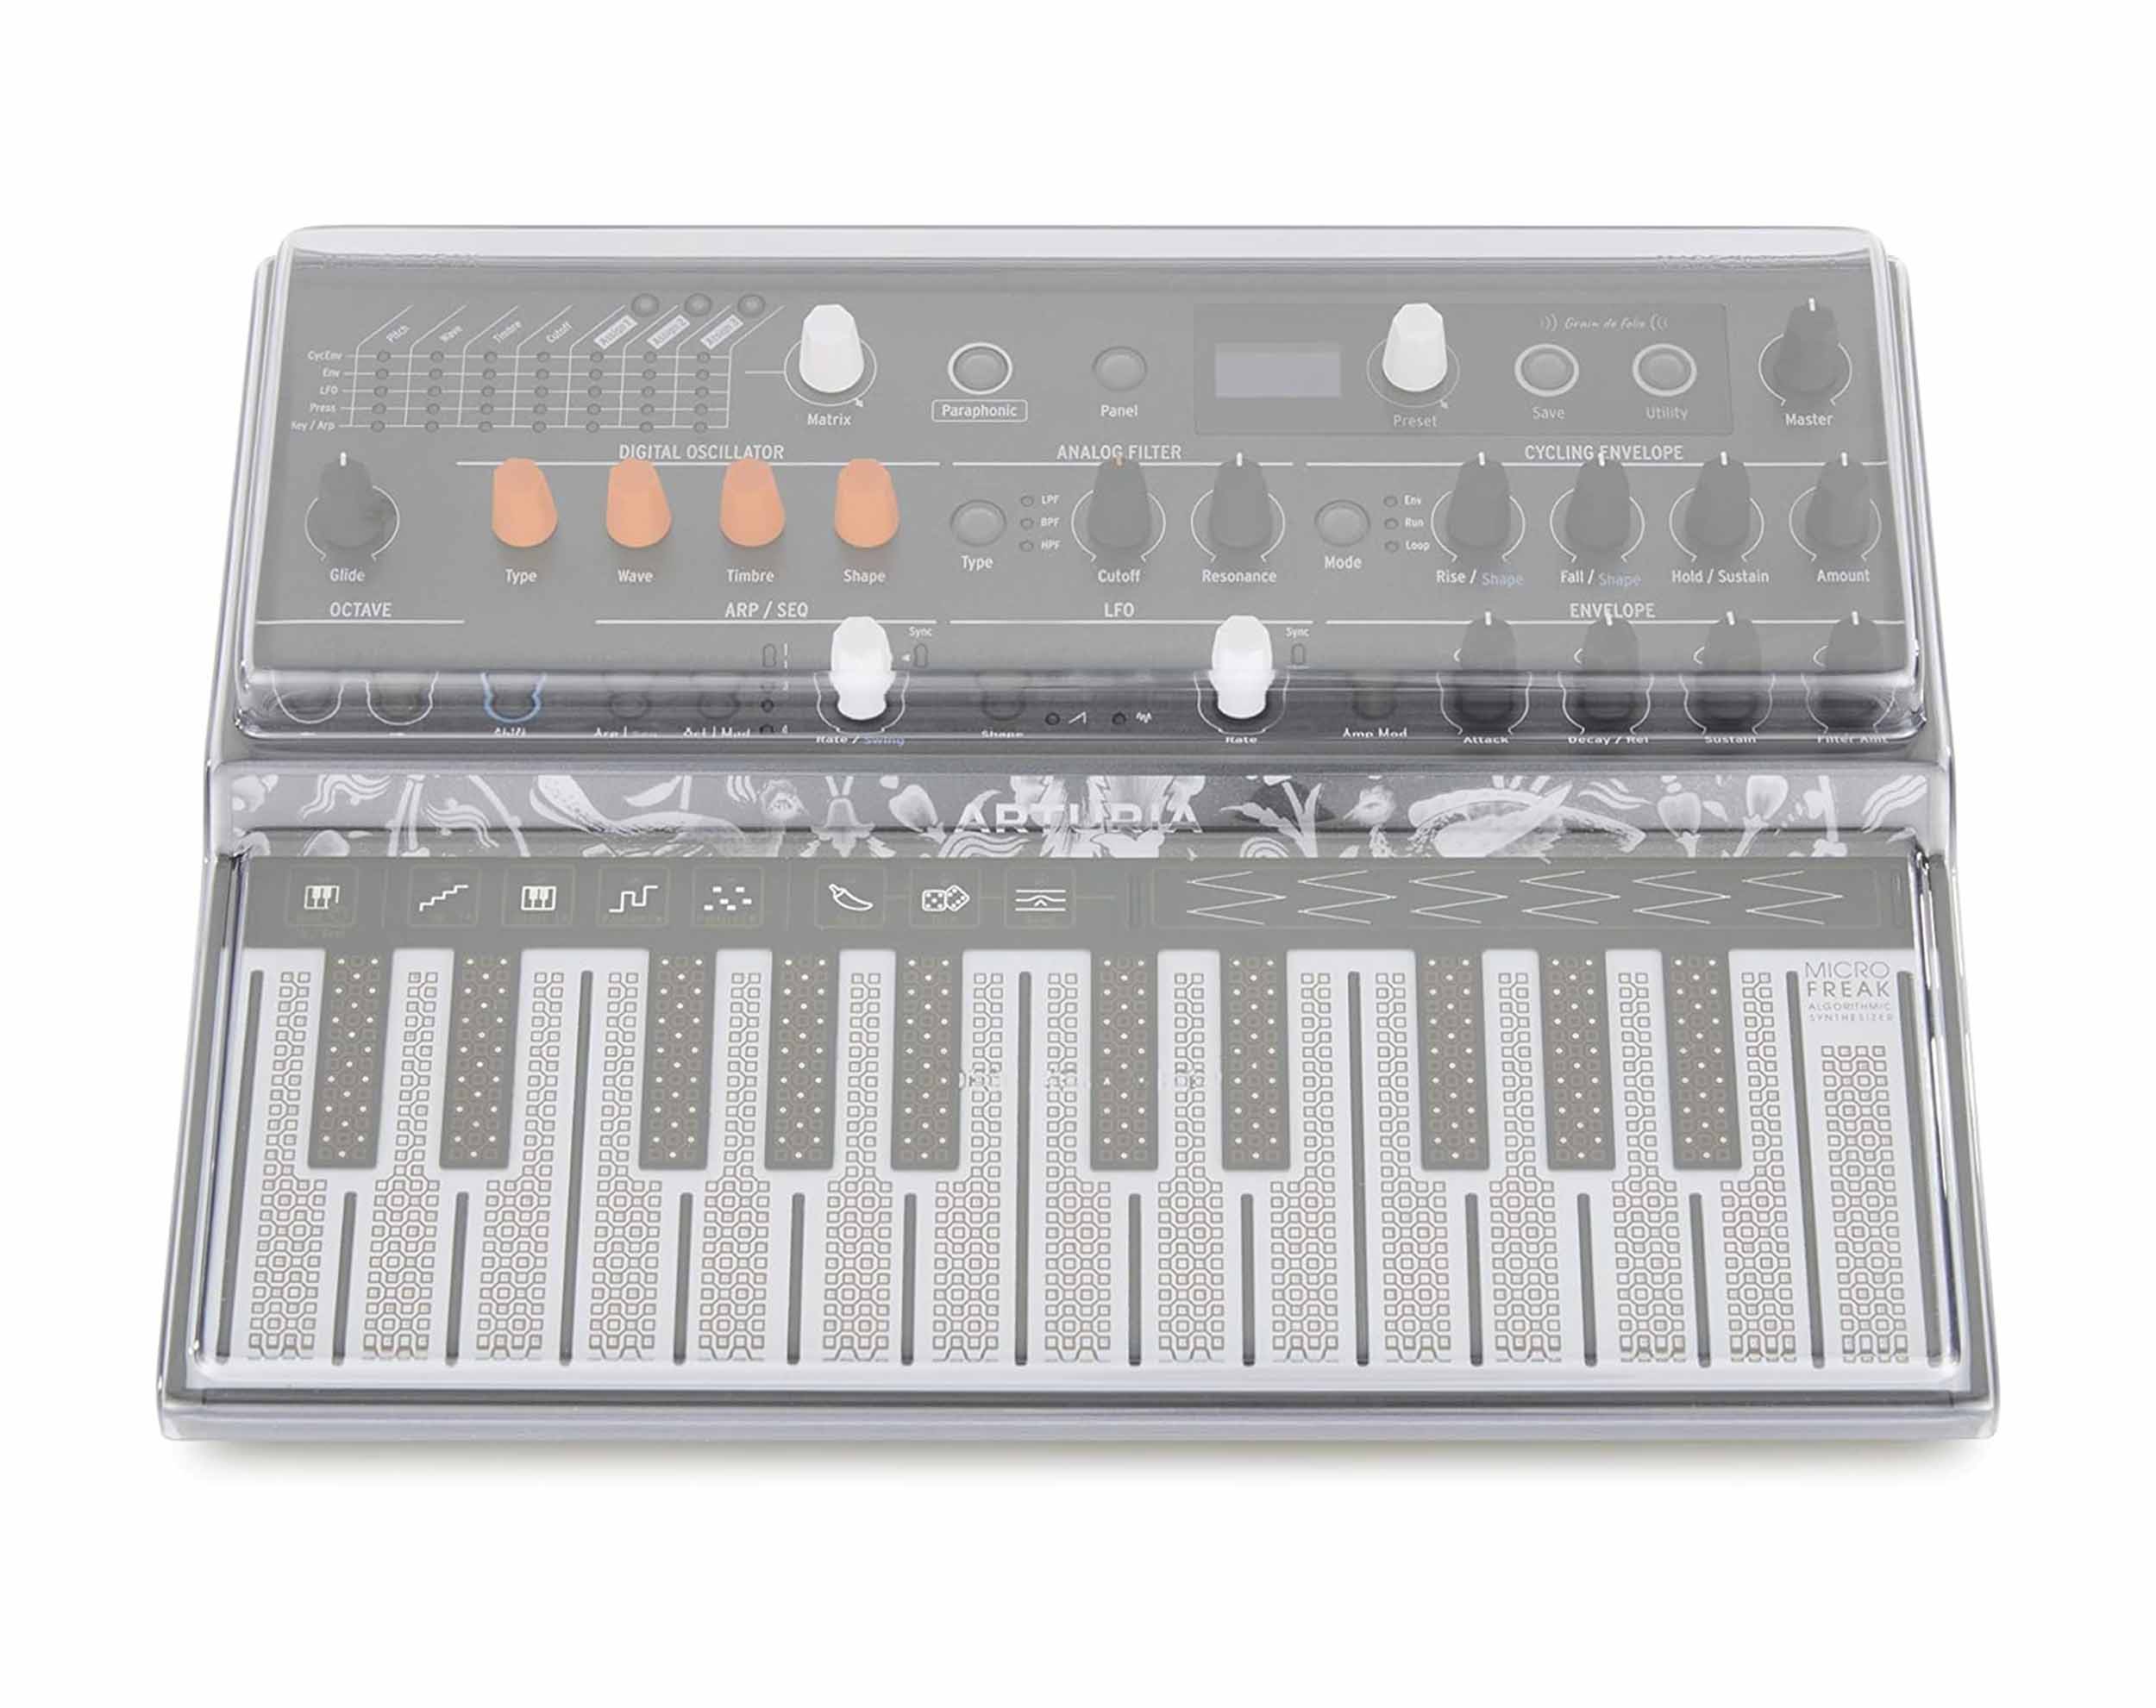 Decksaver DS-PC-MICROFREAK Protection Cover for Arturia Microfreak Synthesizer - Hollywood DJ